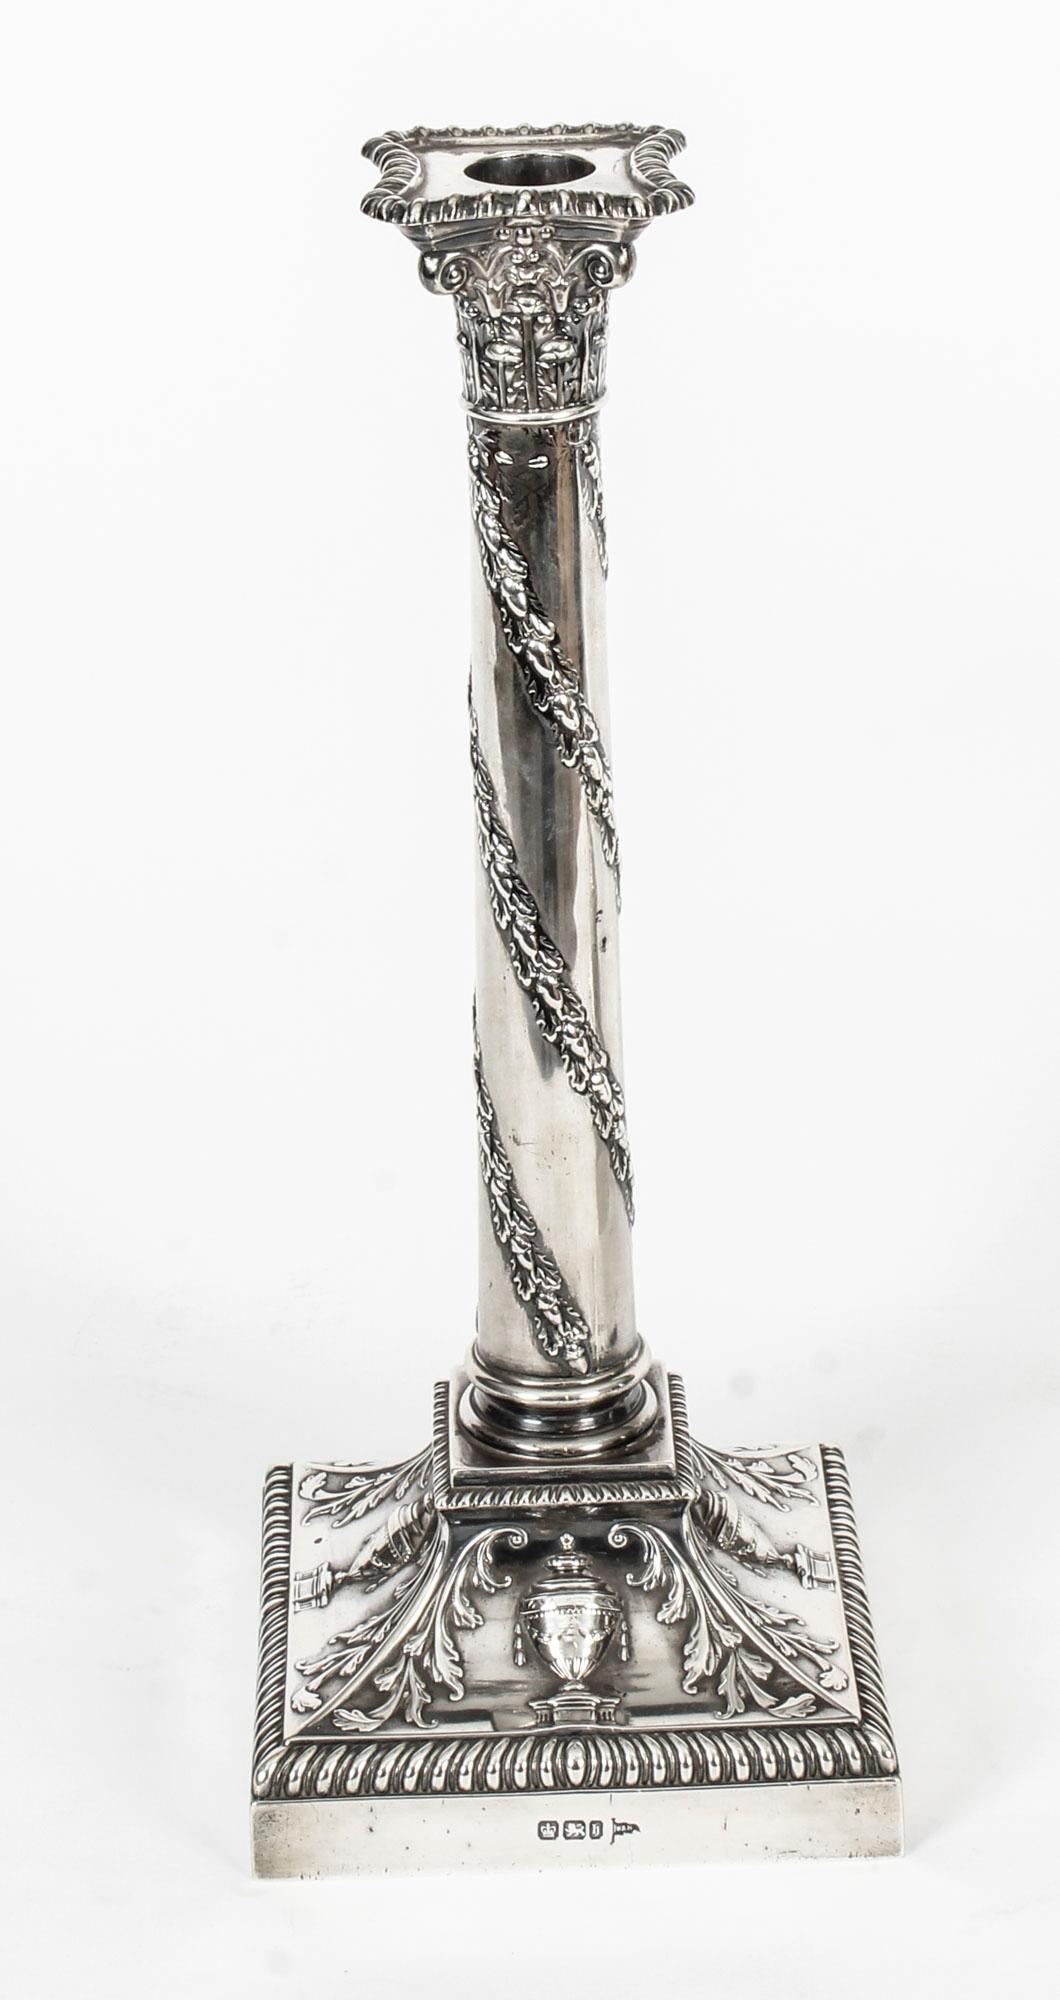 English Antique Pair of Sterling Silver Candlesticks Walker and Hall, 1900